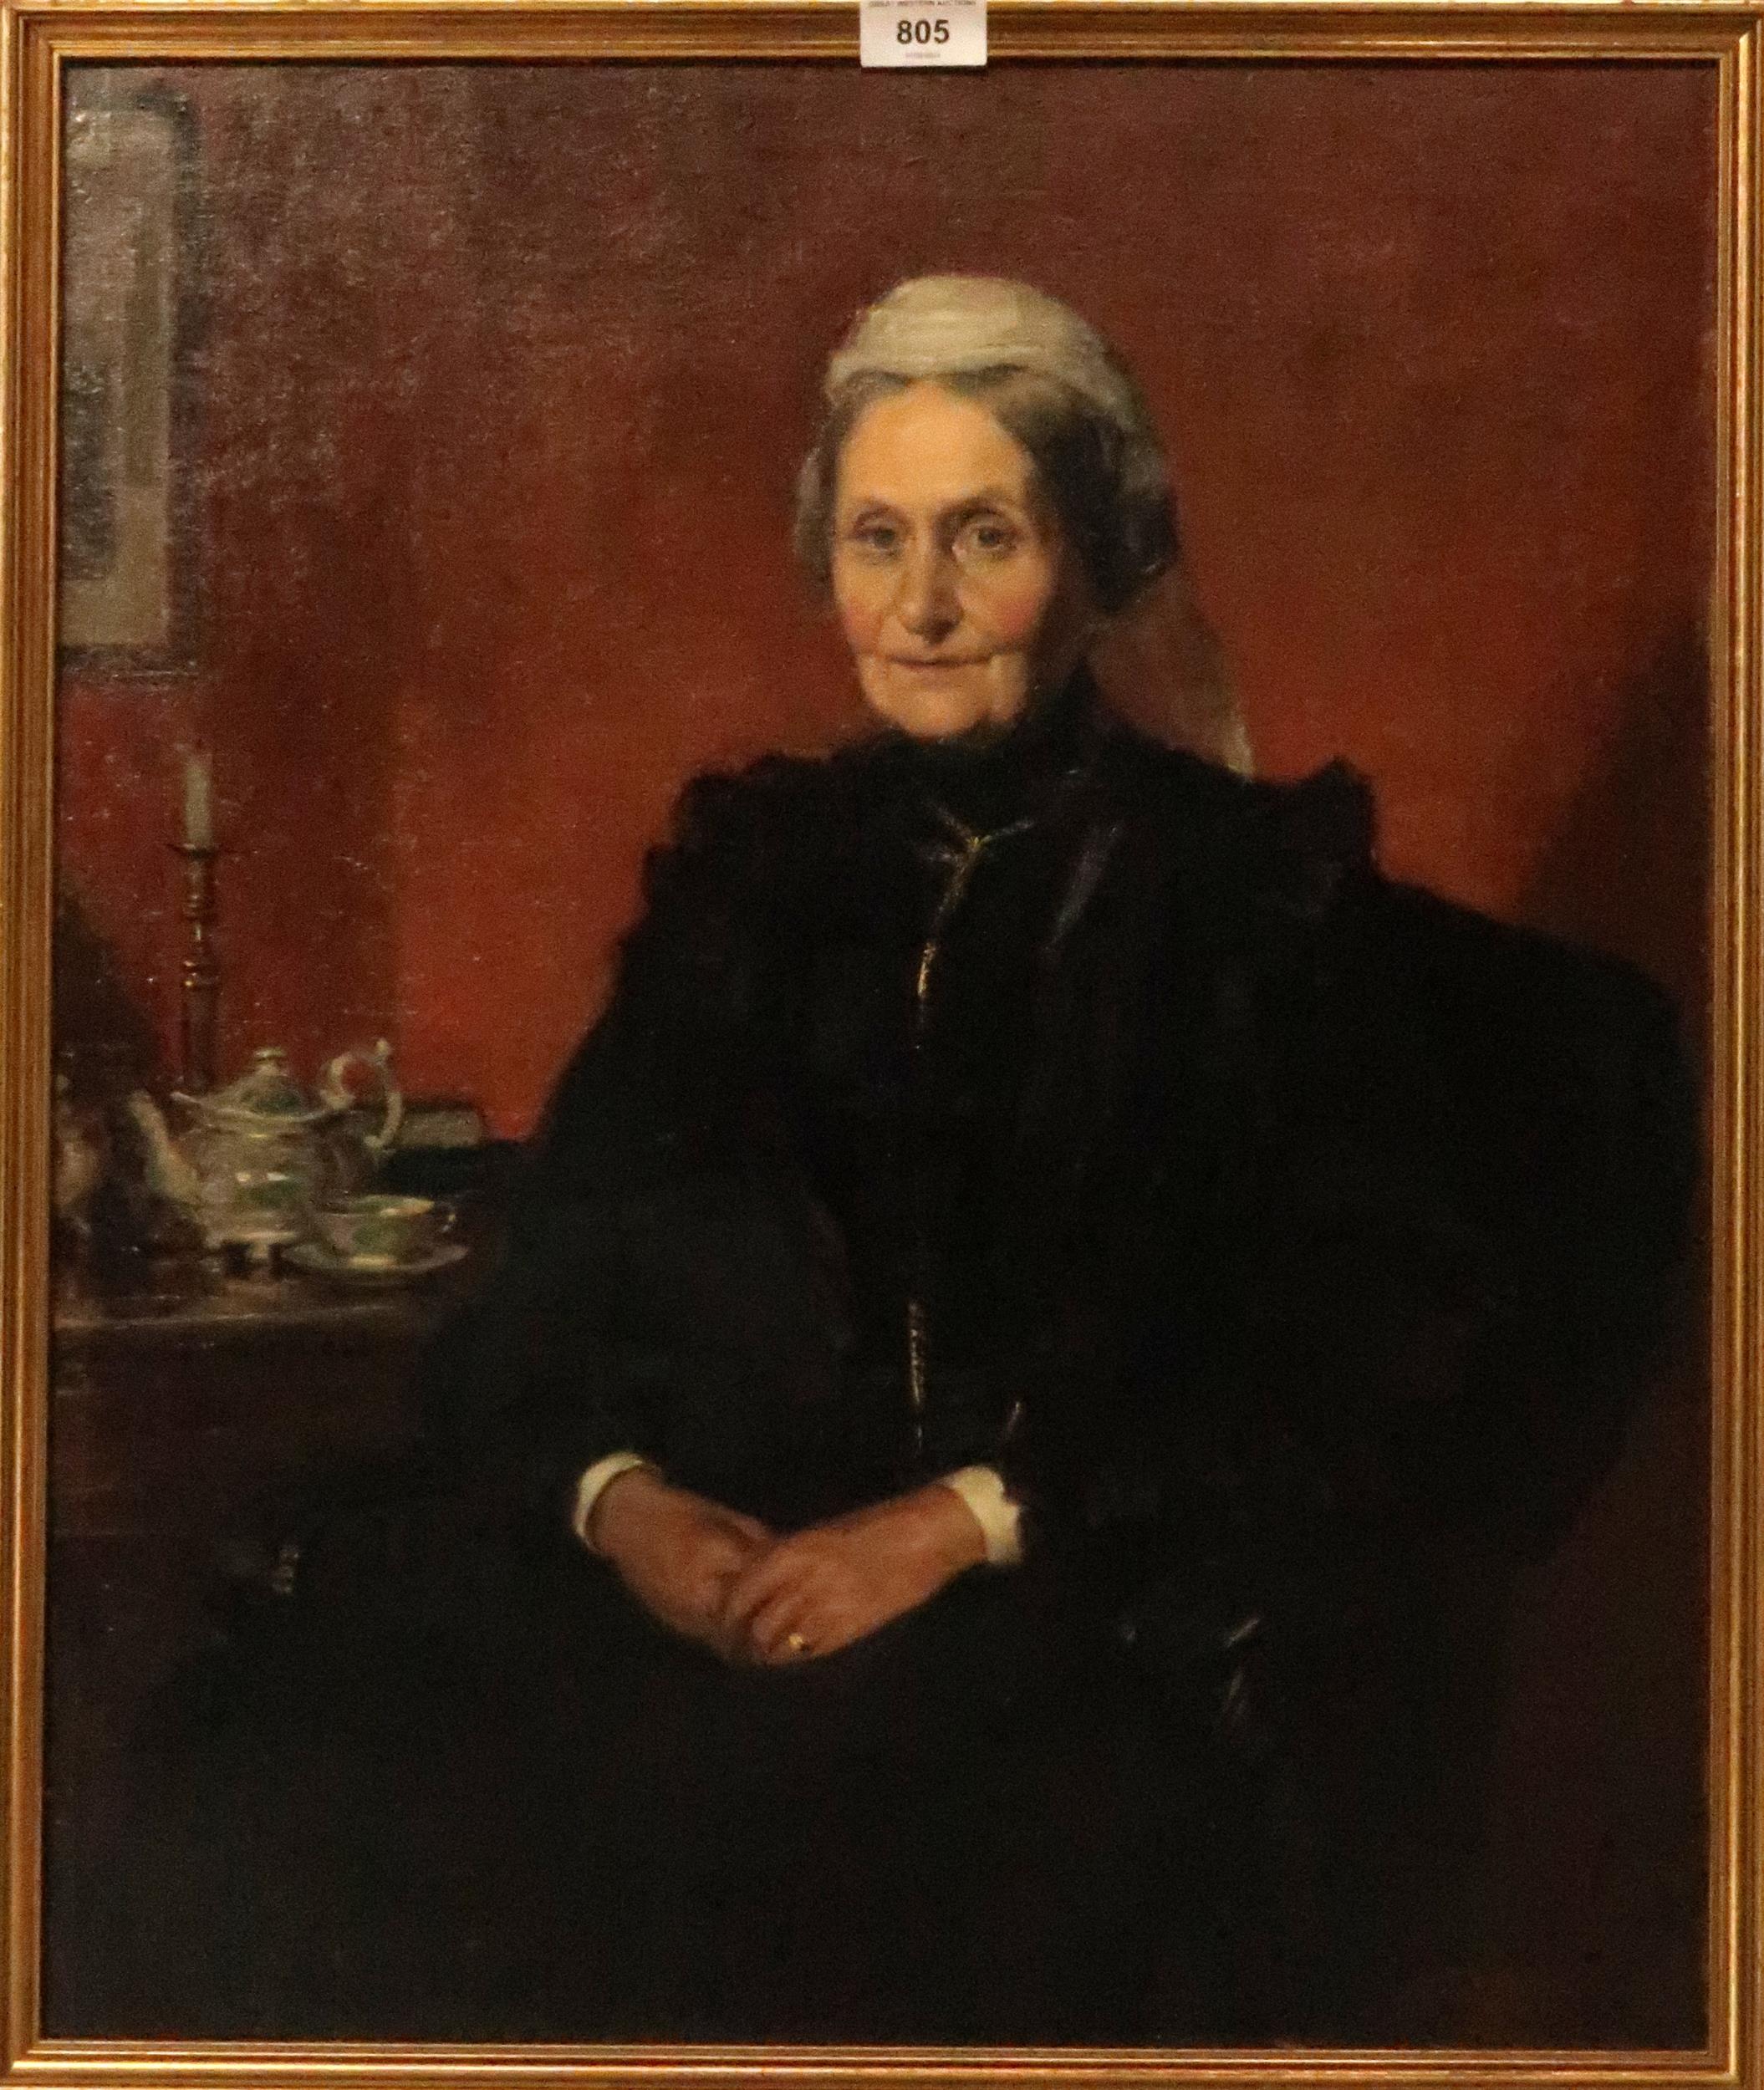 A.P.DIXON Lady seated,three quarter length, portrait, signed, oil on canvas, dated, 1906 60 x 50cm - Image 2 of 3